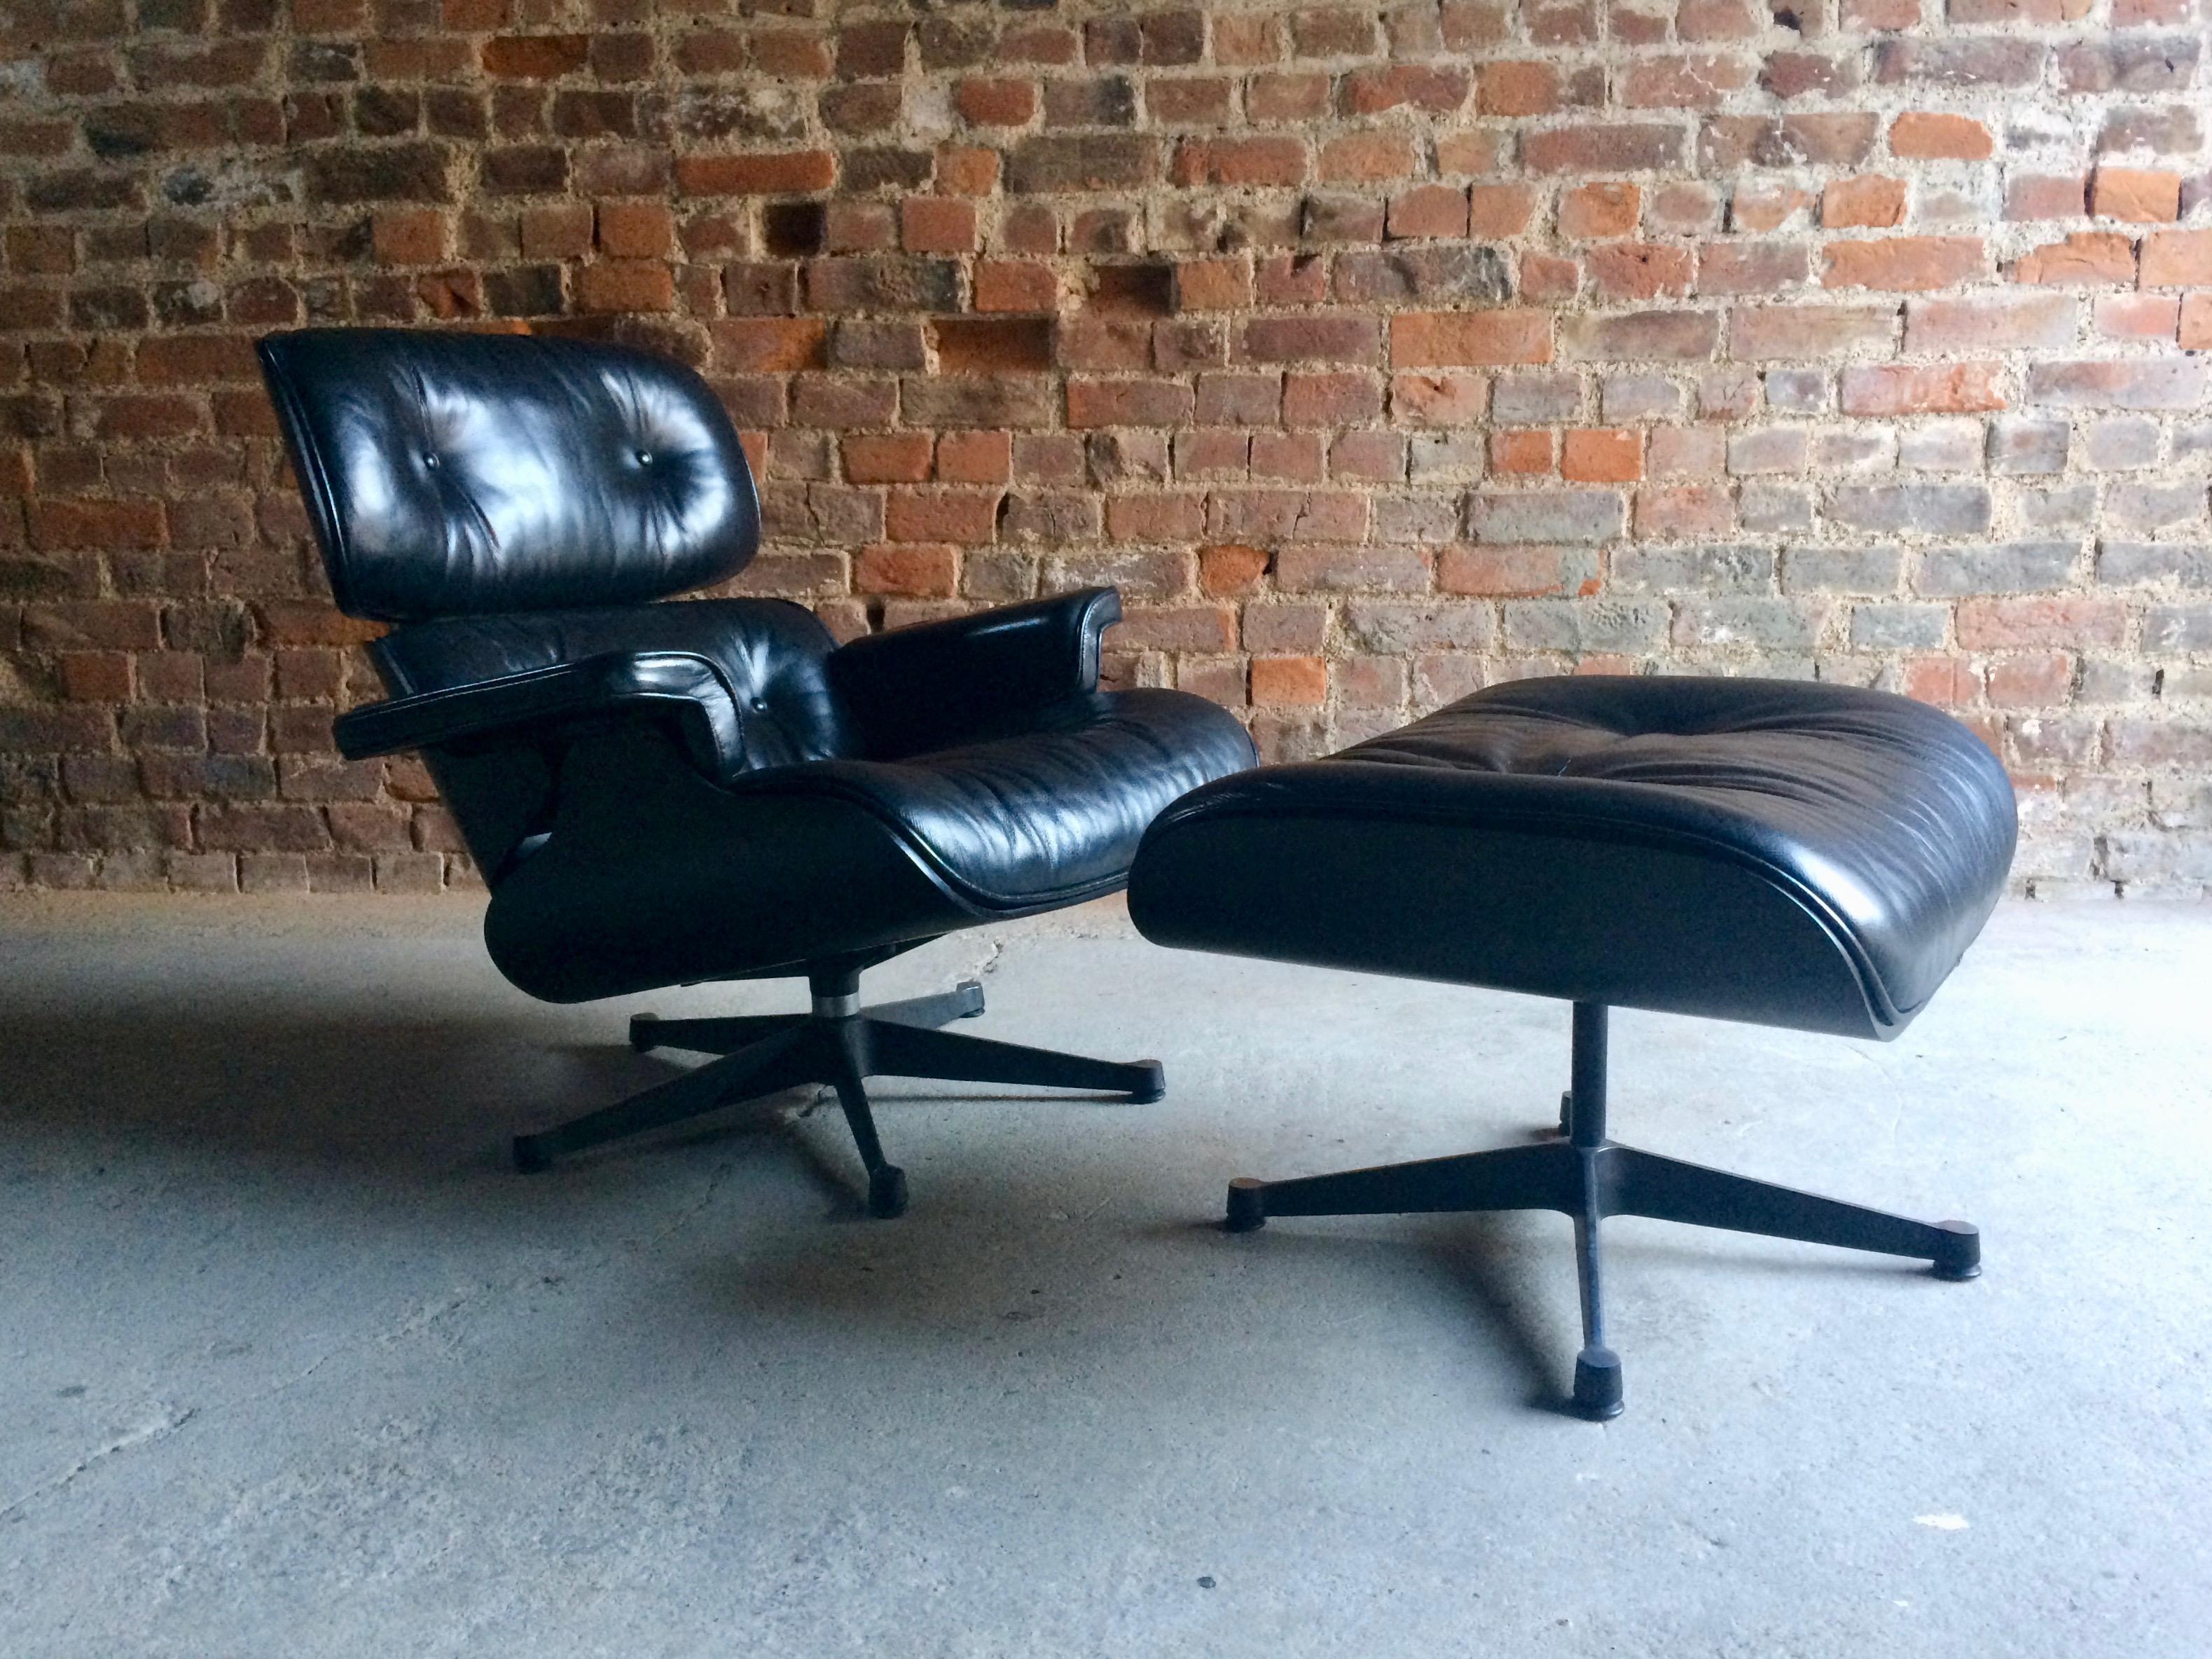 Original Charles & Ray Eames 670 lounge chair and matching 671 Ottoman in black ash with contrasting nero black leather produced by Vitra in 2008, both the chair and ottoman are offered in excellent condition and aged to perfection.

Background: